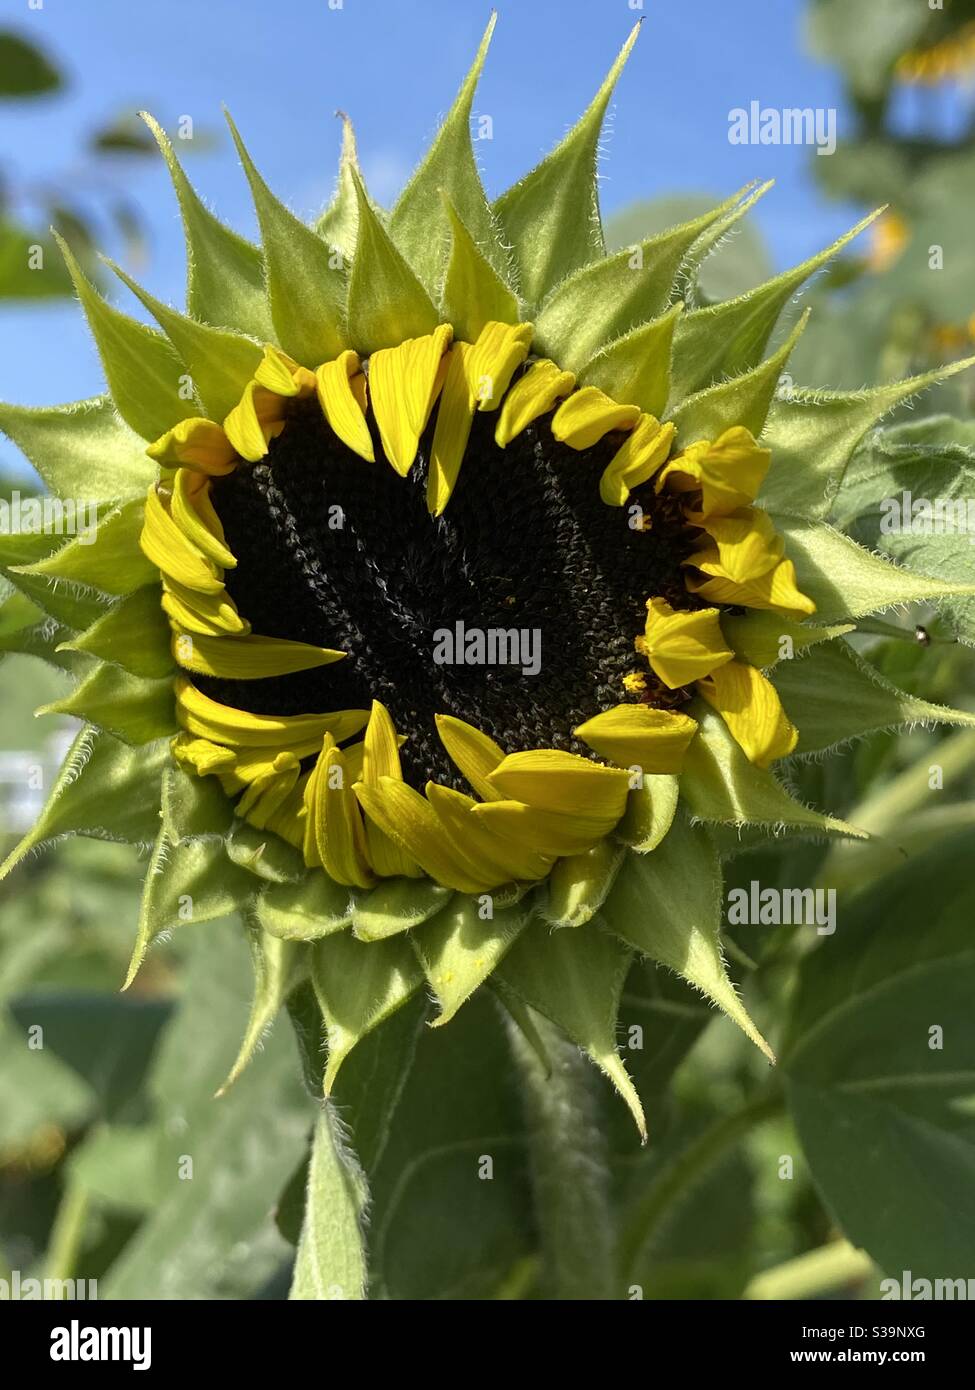 Giant sunflower about to bloom Stock Photo